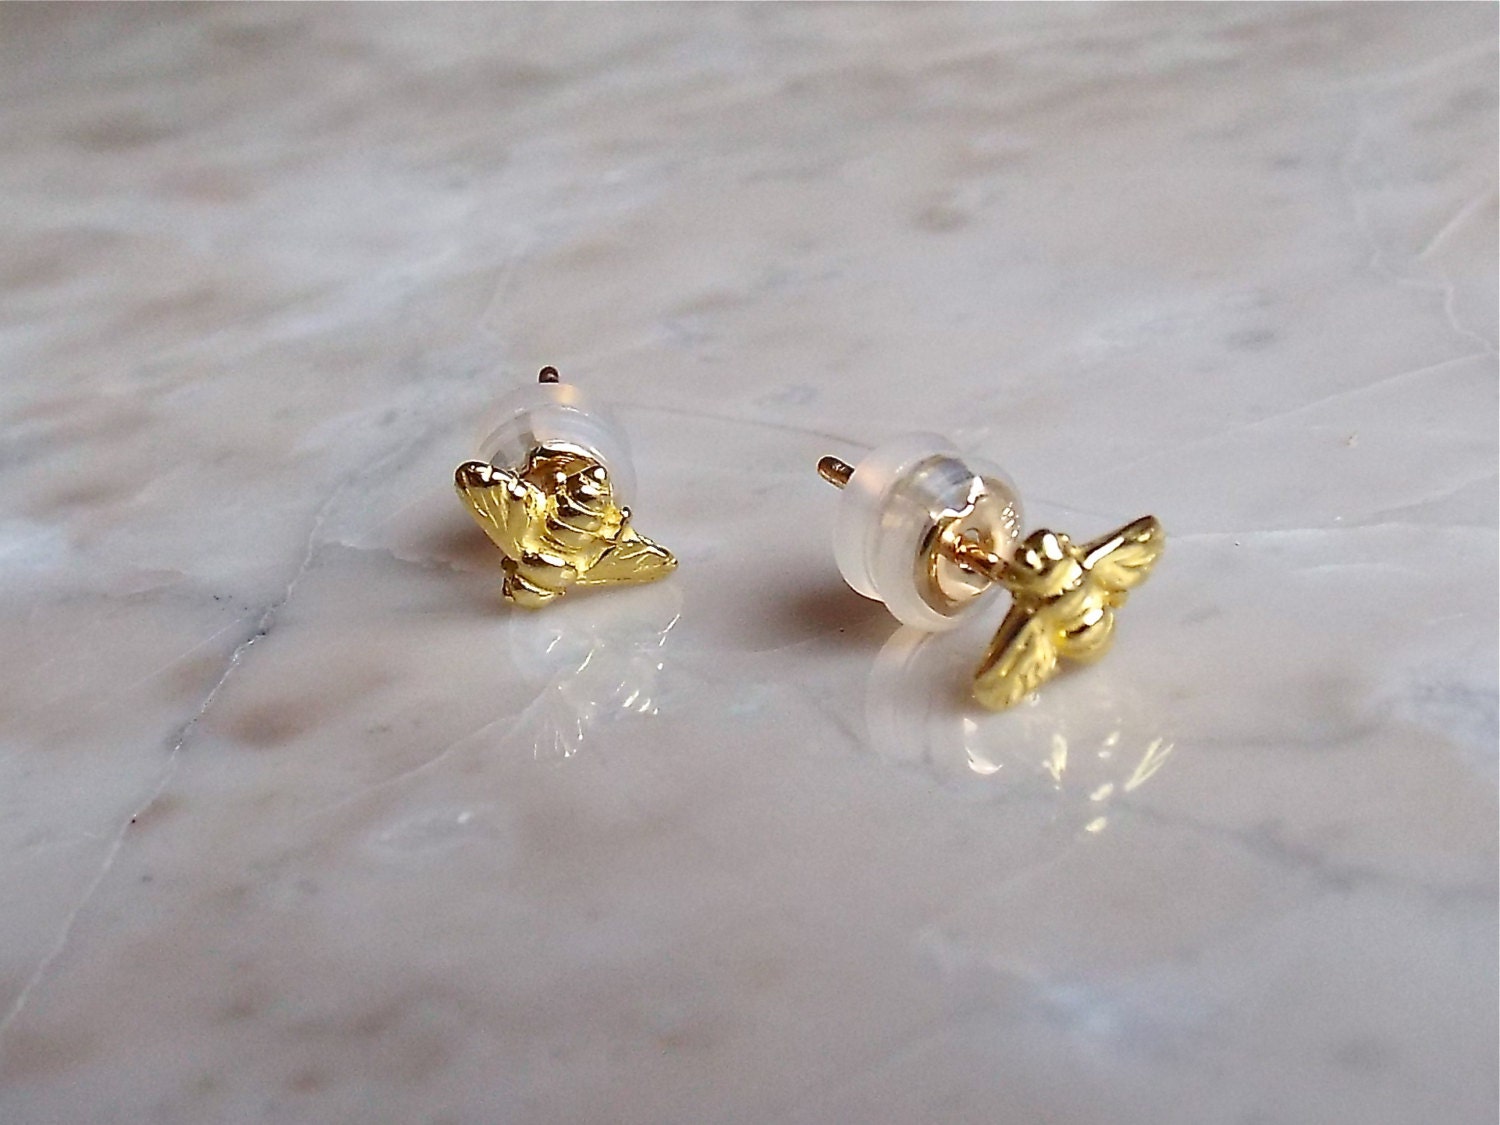 Solid 22k gold HONEY BEE EARRINGS. Detailed gold bee solid 14k